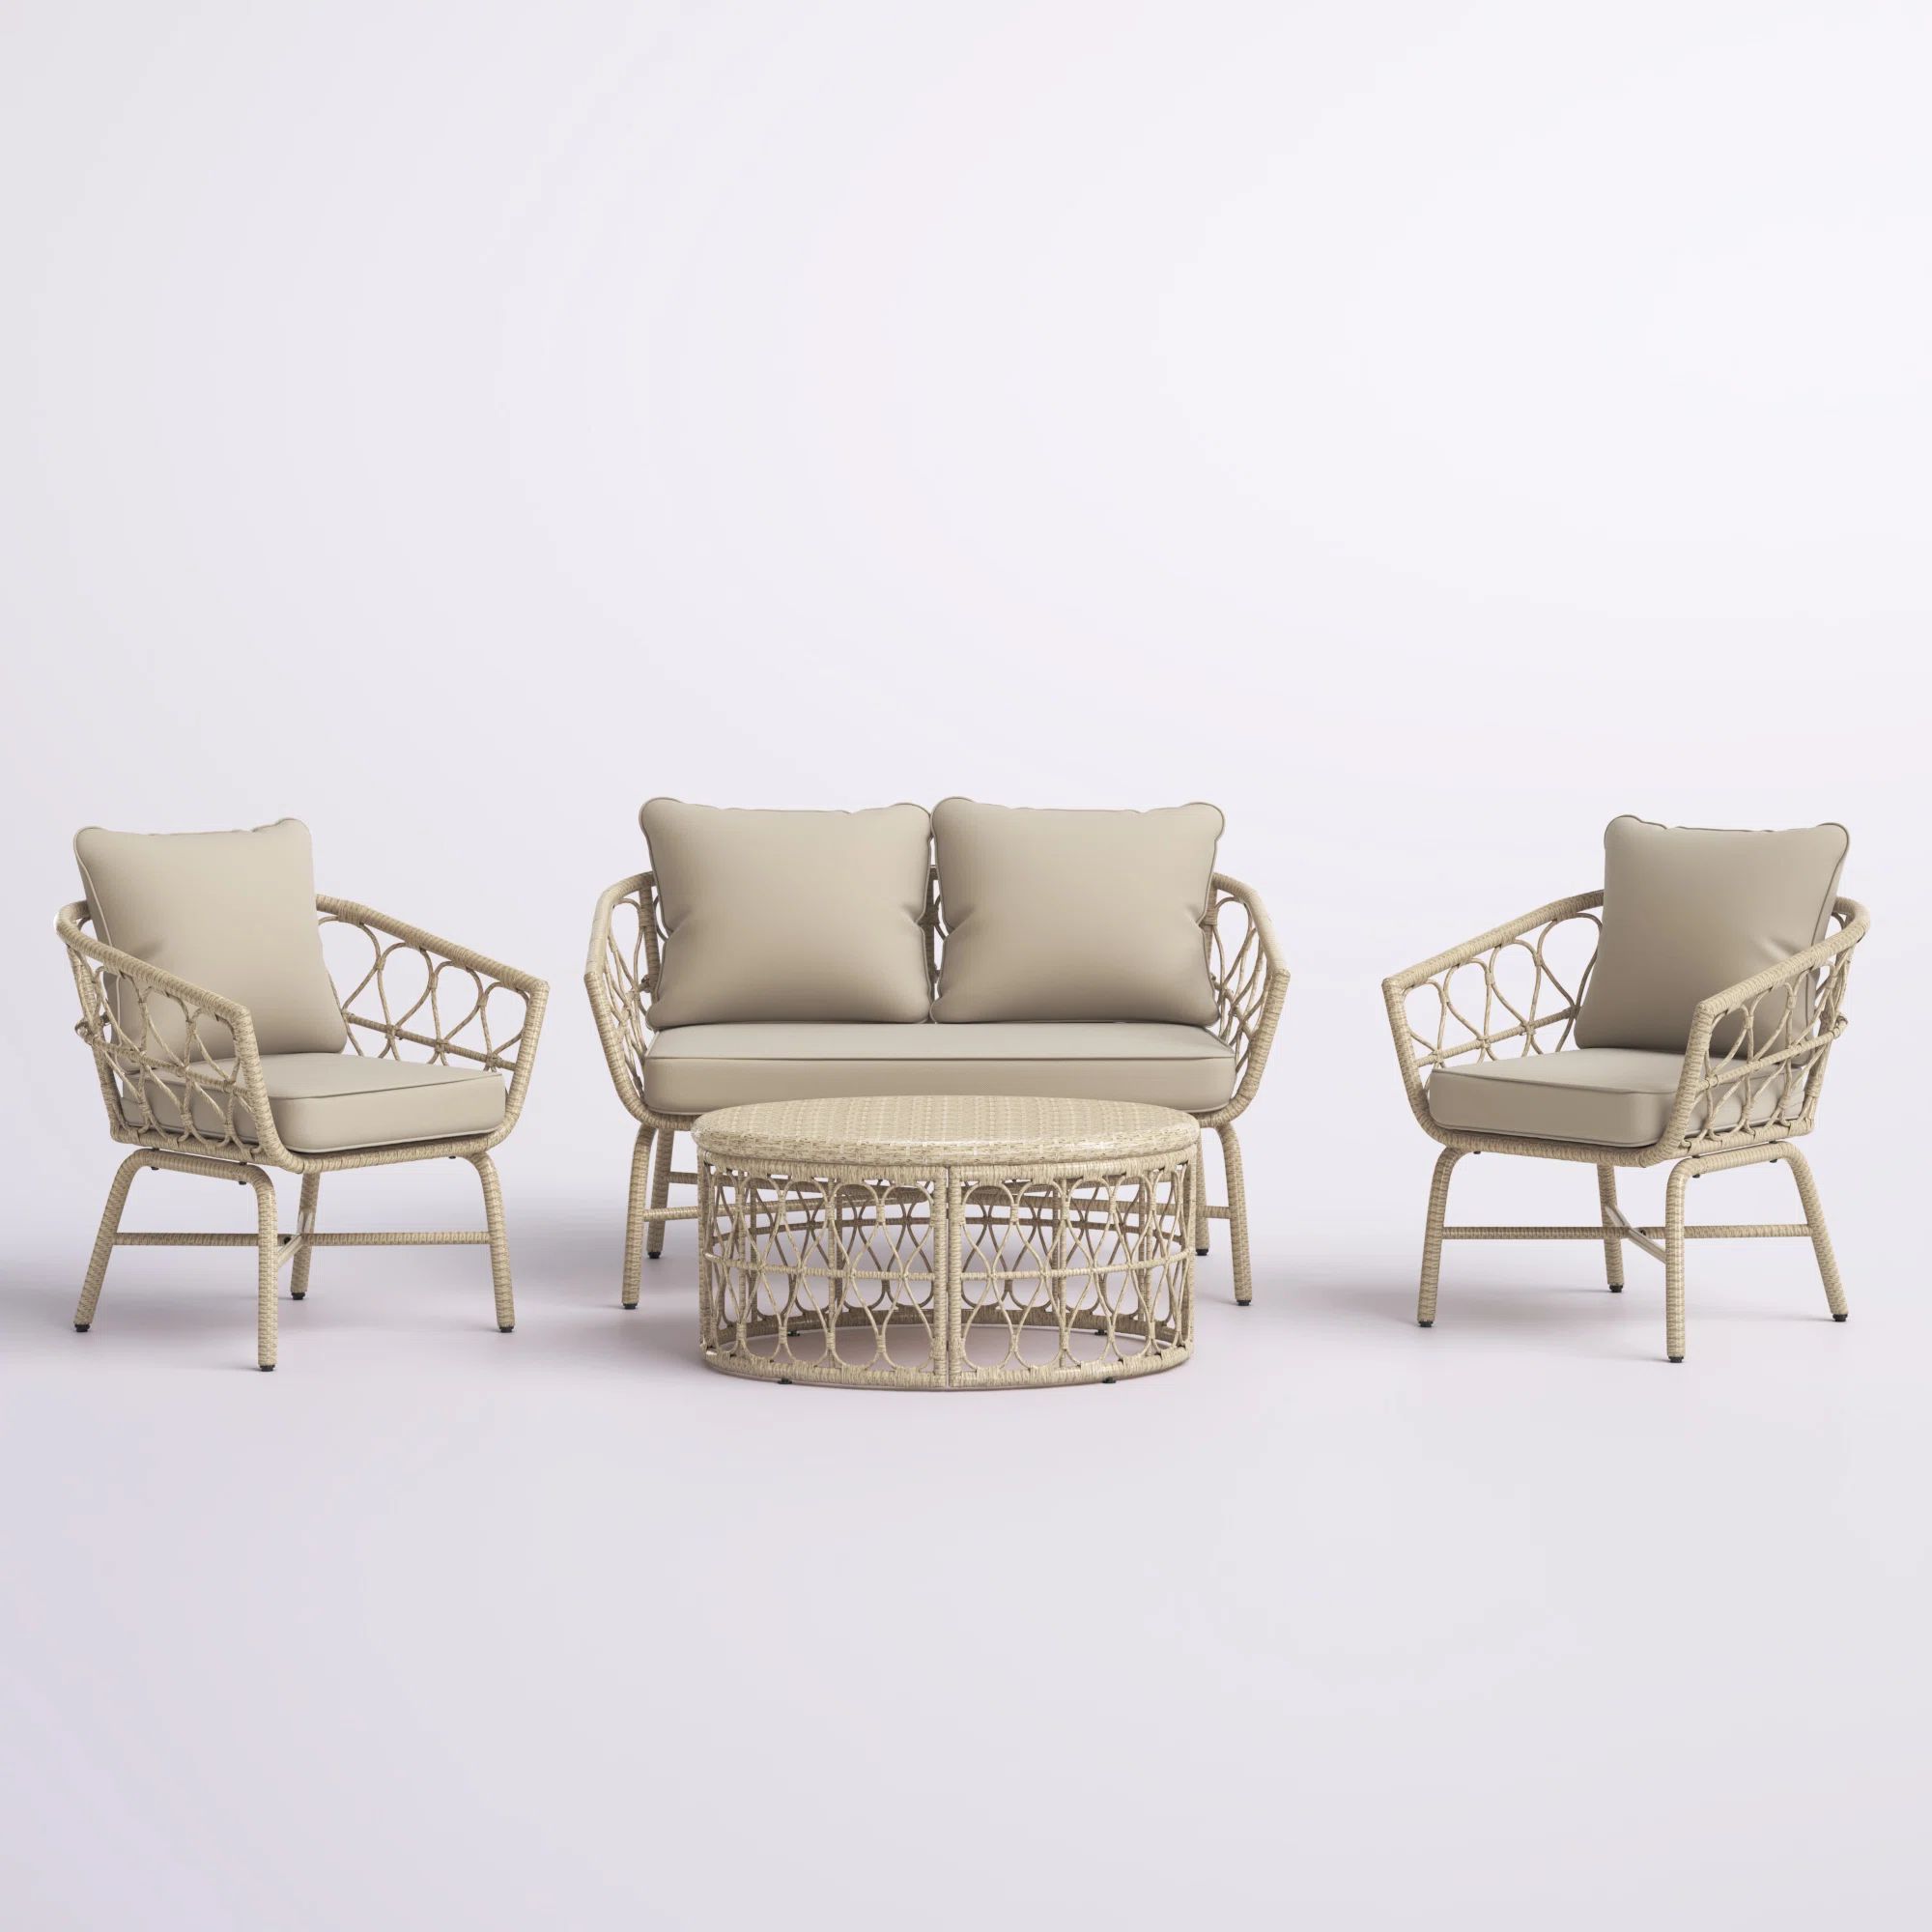 Raynette 4 - Person Outdoor Seating Group with Cushions | Wayfair North America